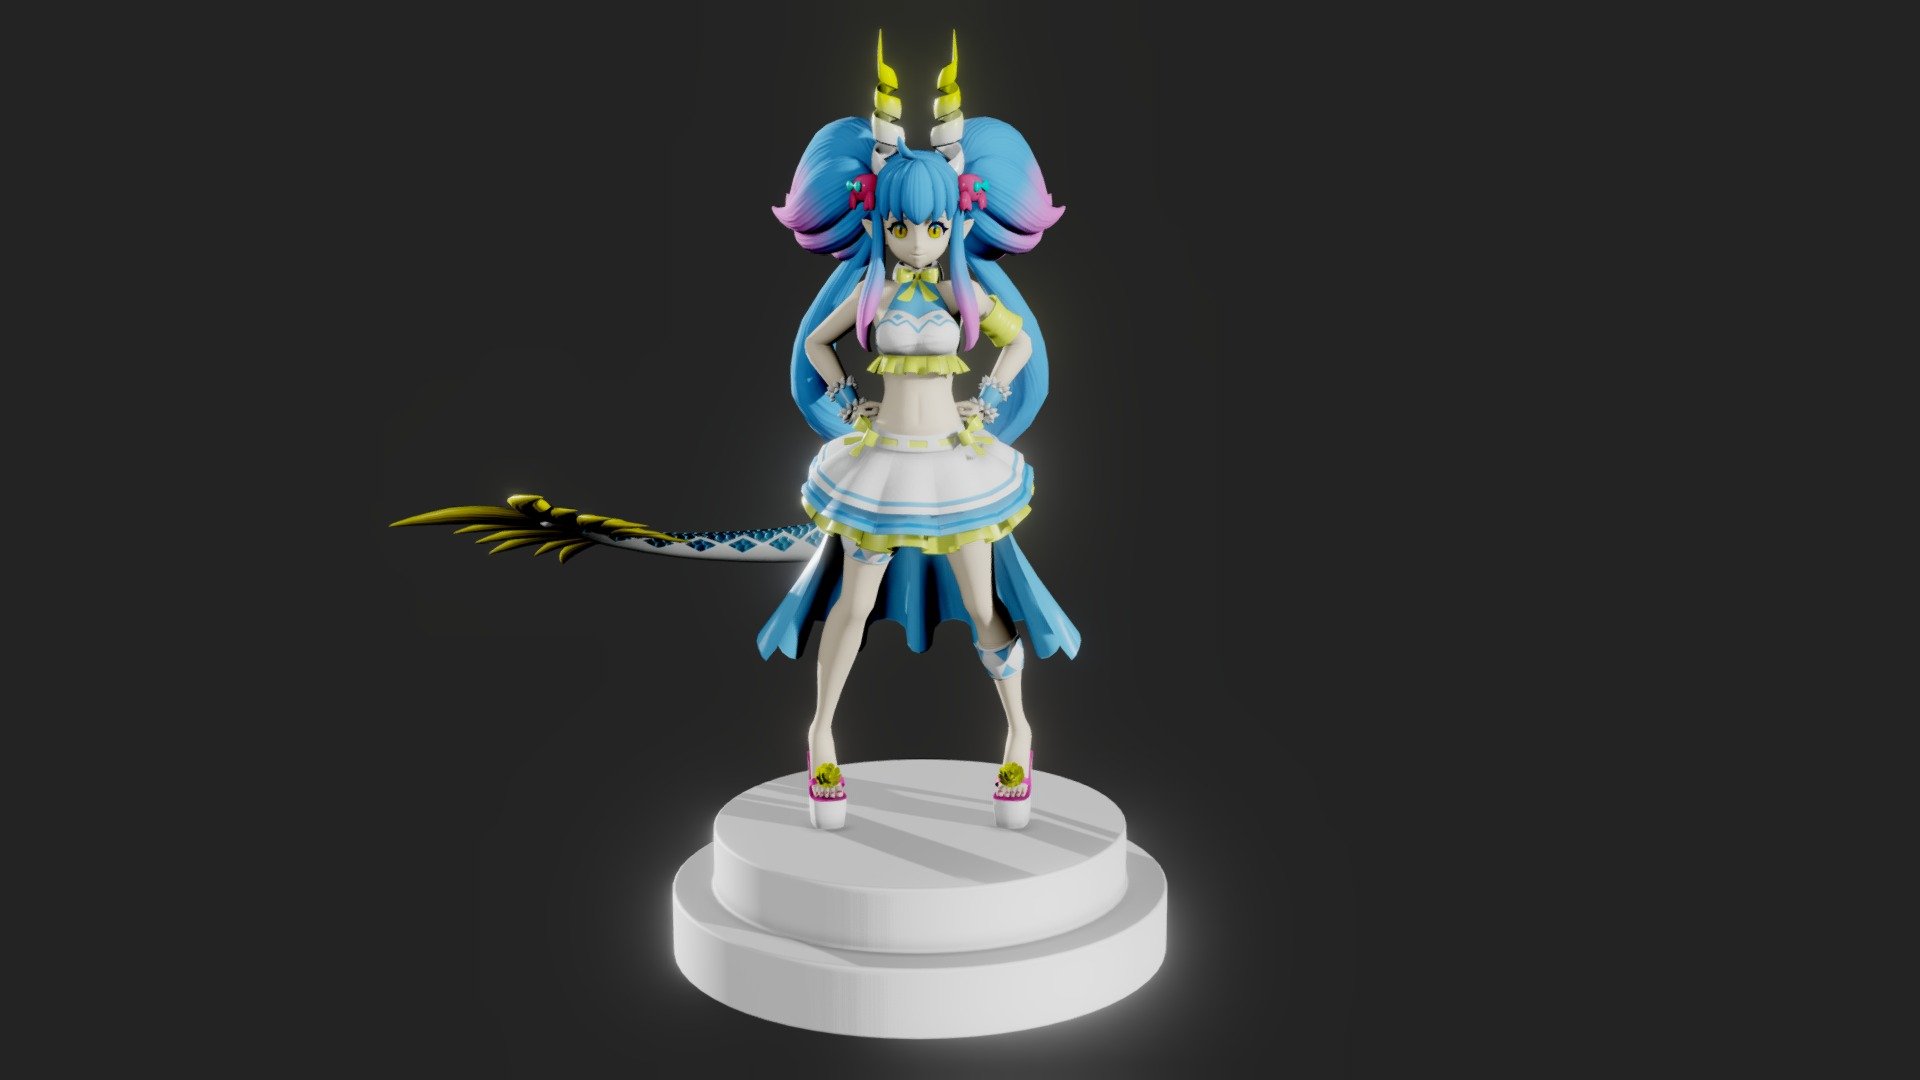 Fan-art of Siren from Dragalia Lost by Cygames / Nintendo. Modeled, textured, rigged, and animated by me. Game-ready and animation-ready model 3d model